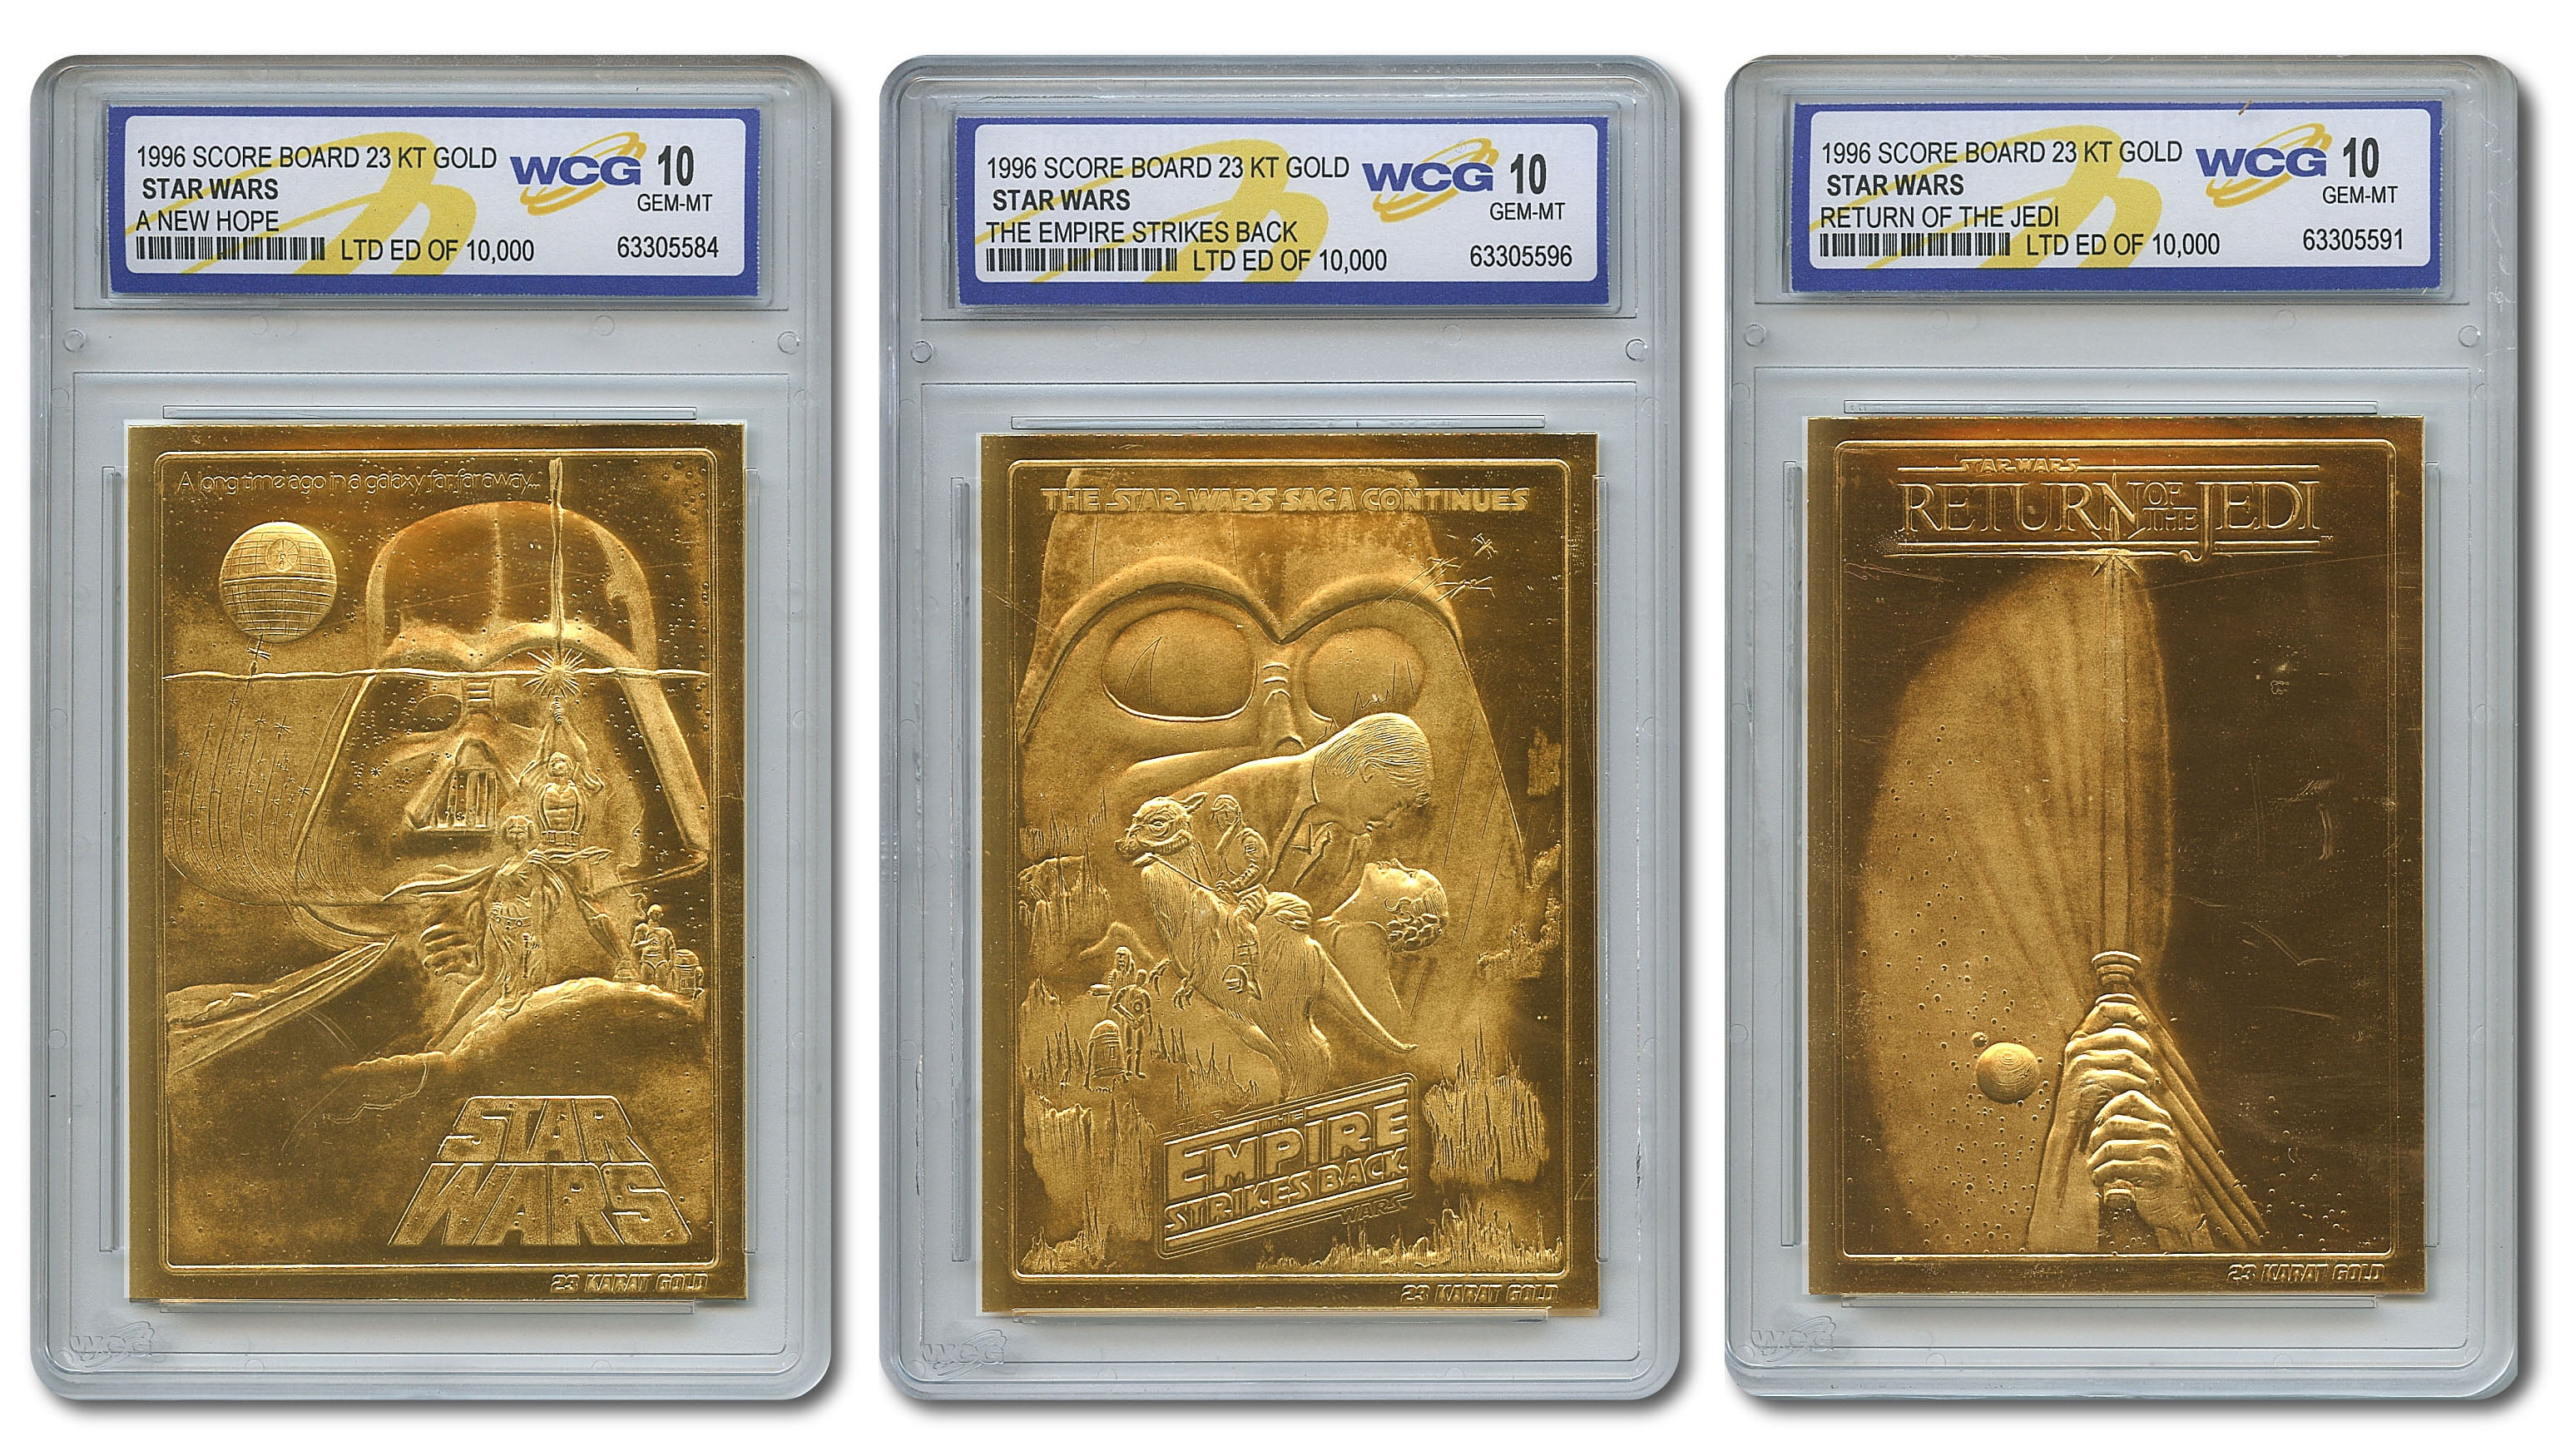 STAR WARS "RETURN OF THE JEDI" 23K GOLD CARD LIMITED EDITION OF 10000 